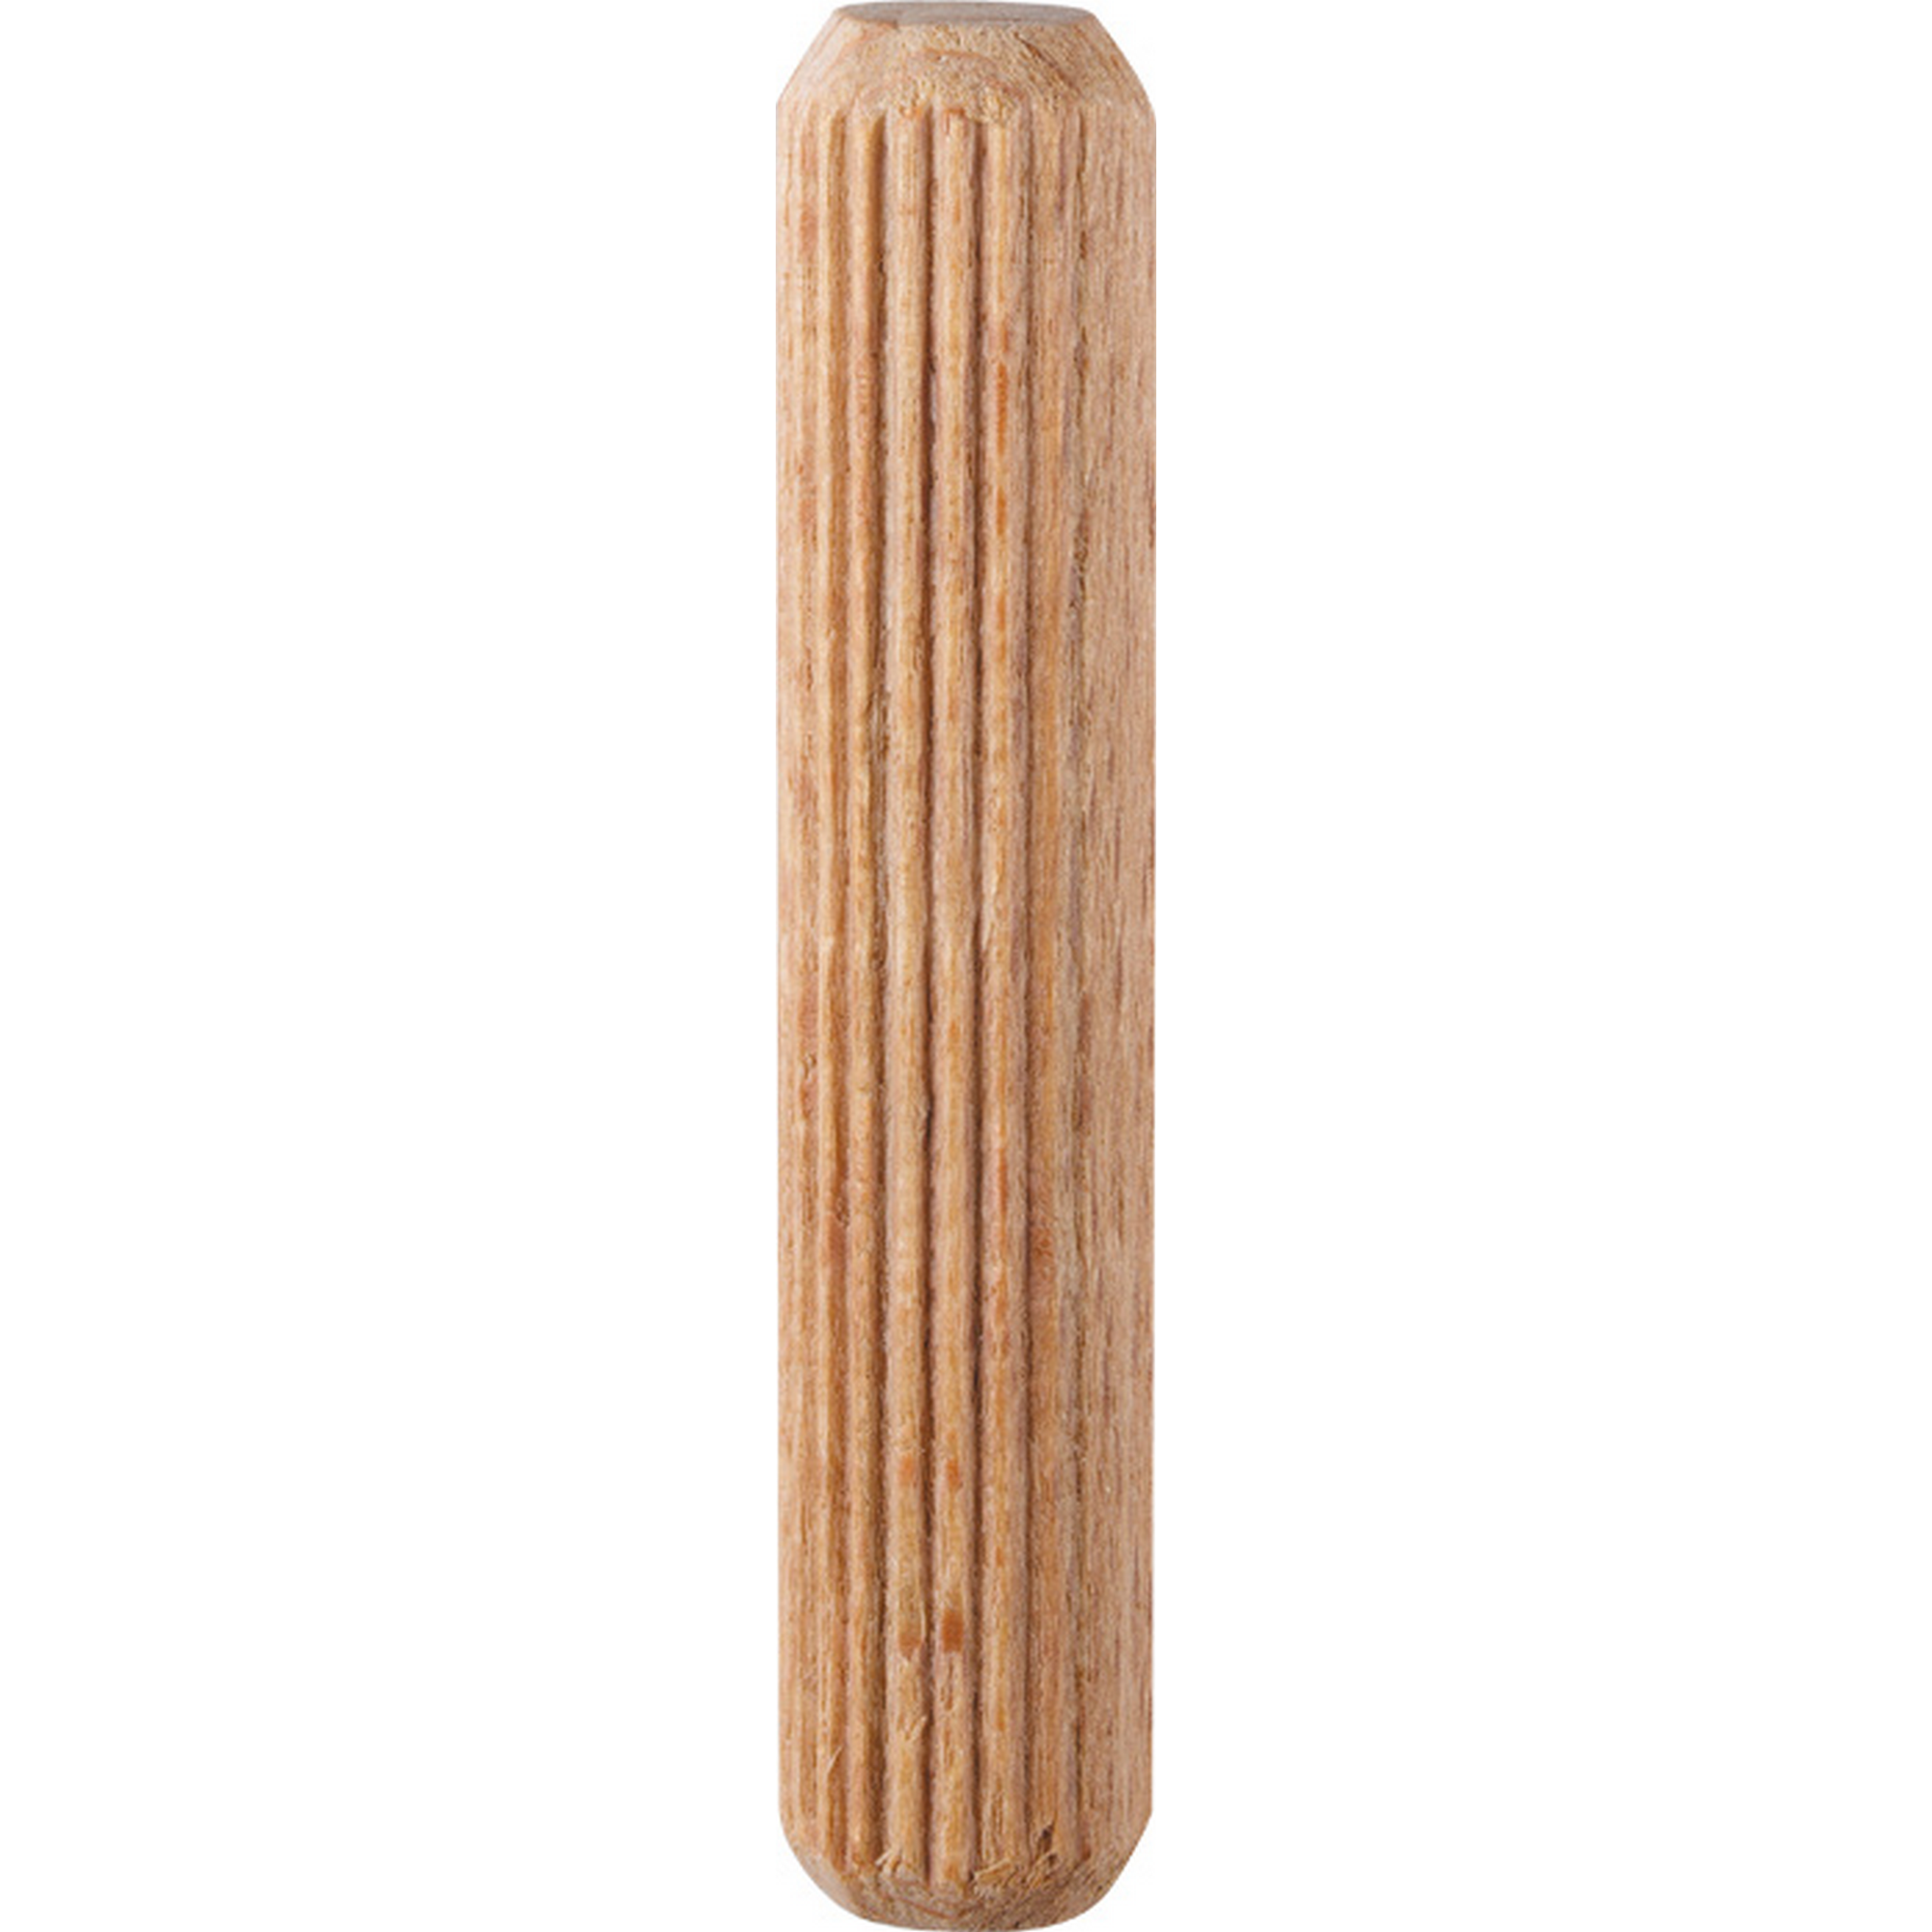 Holzdübel 8 x 40 mm 150 Stück + product picture